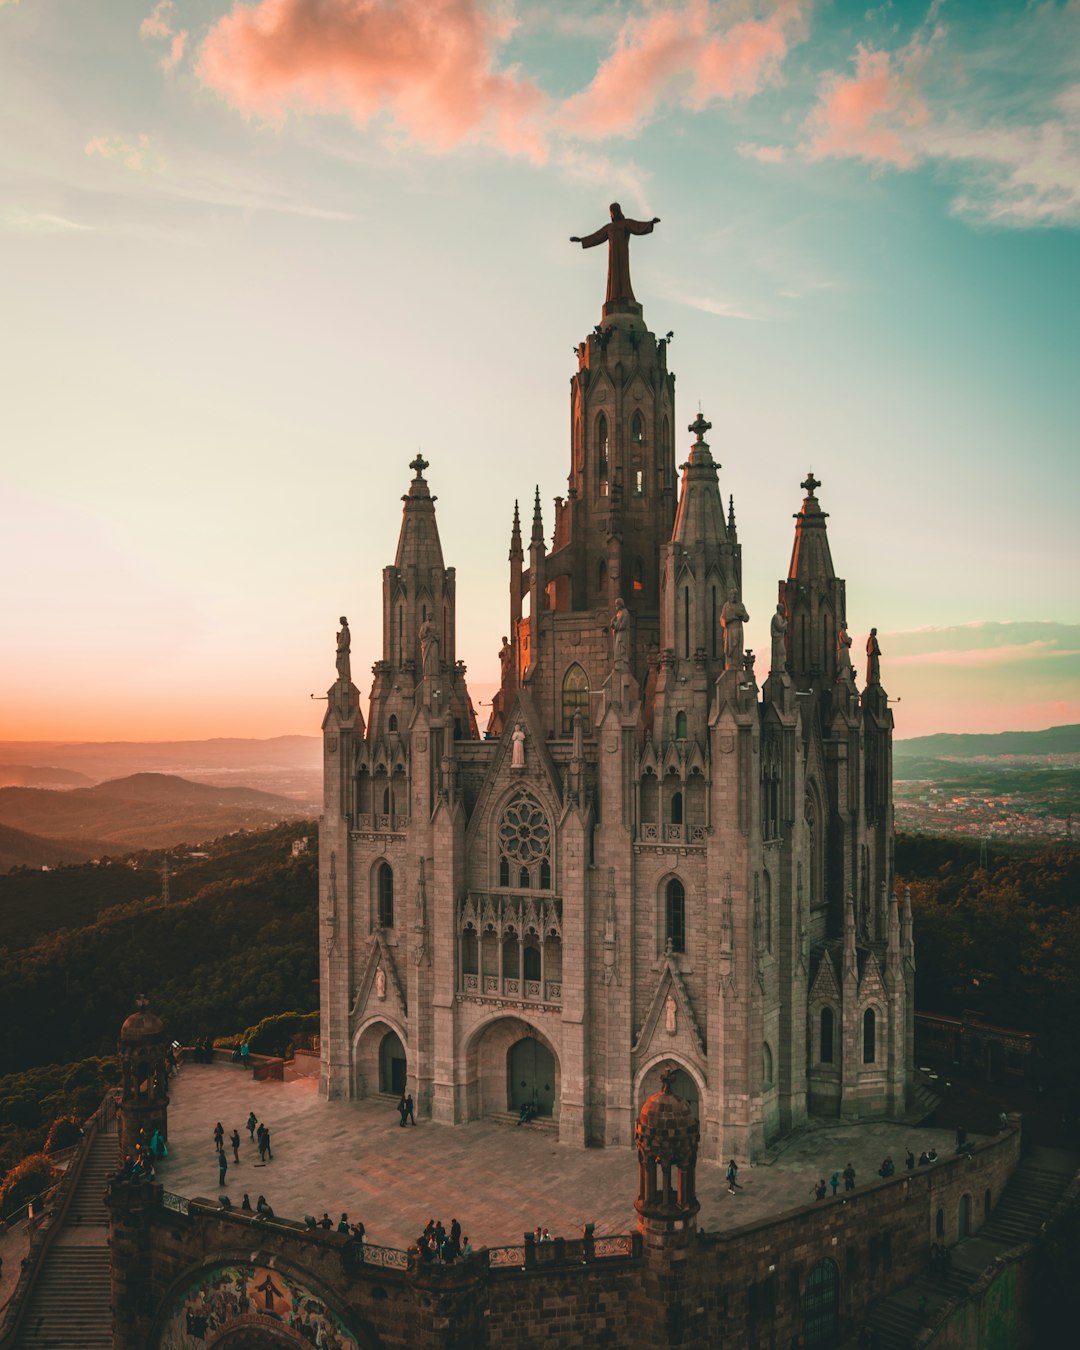 Travel Tips and Stories of Tibidabo in Spain